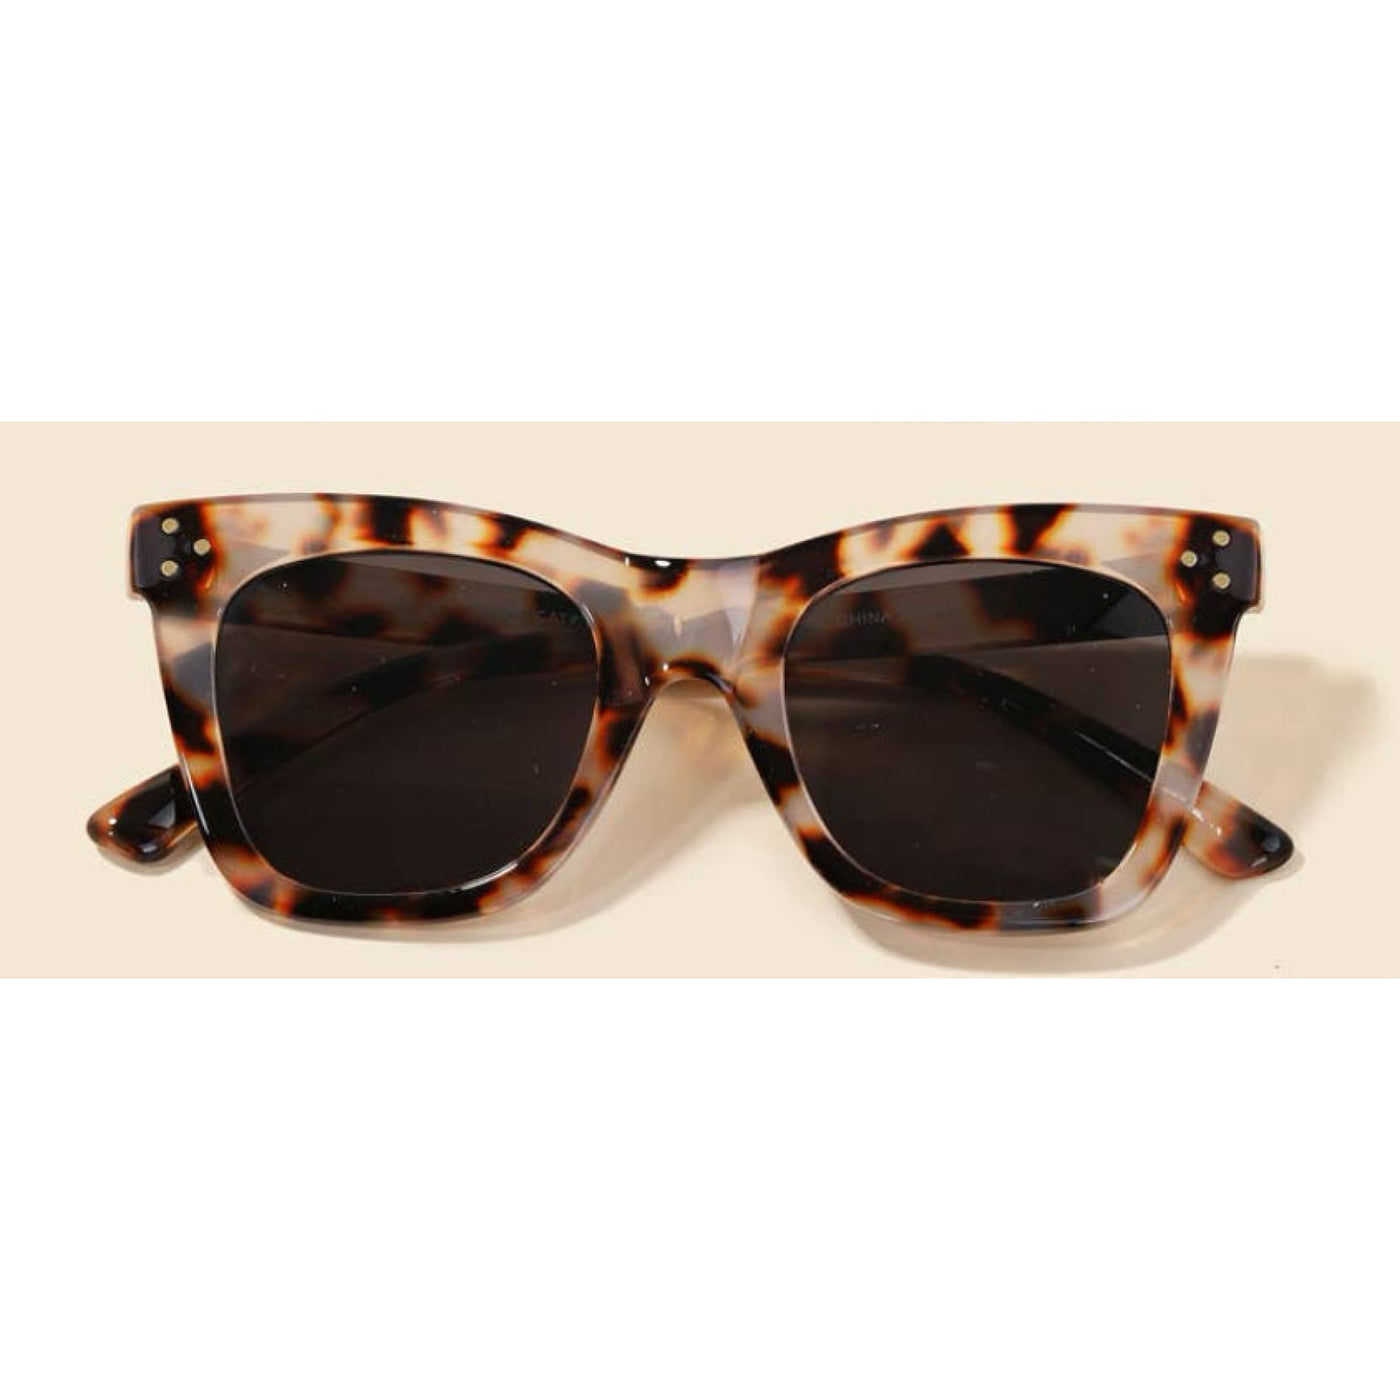 Sunglasses - Tortoise - 210 Other Accessories